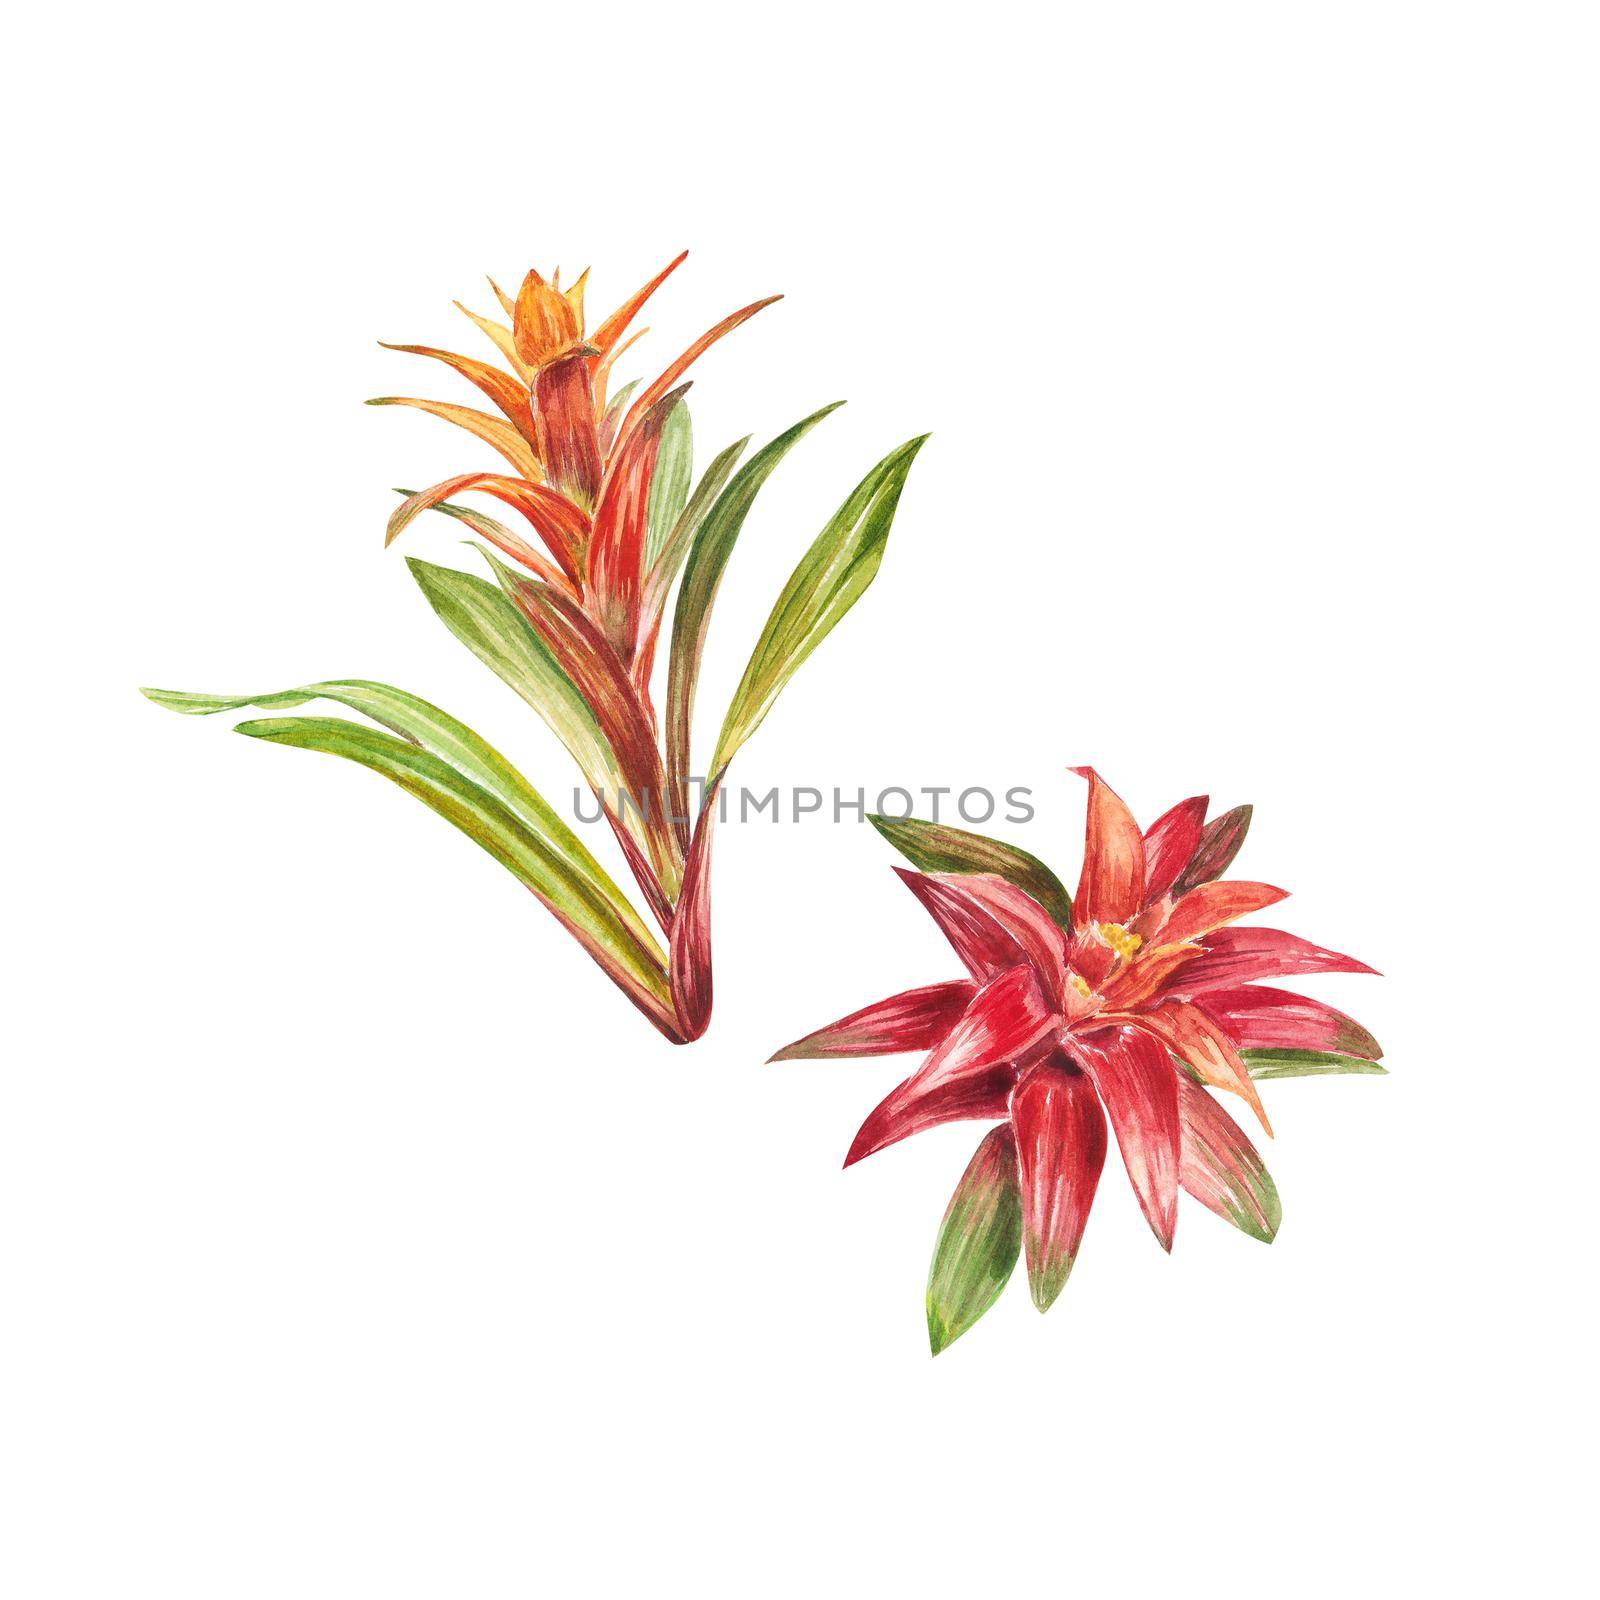 Tropical bromeliad plant with red and green leaves, hand-painted in watercolor. The illustration is highlighted on a white background. Spring or summer flower for weddings, invitations, postcards by NastyaChe